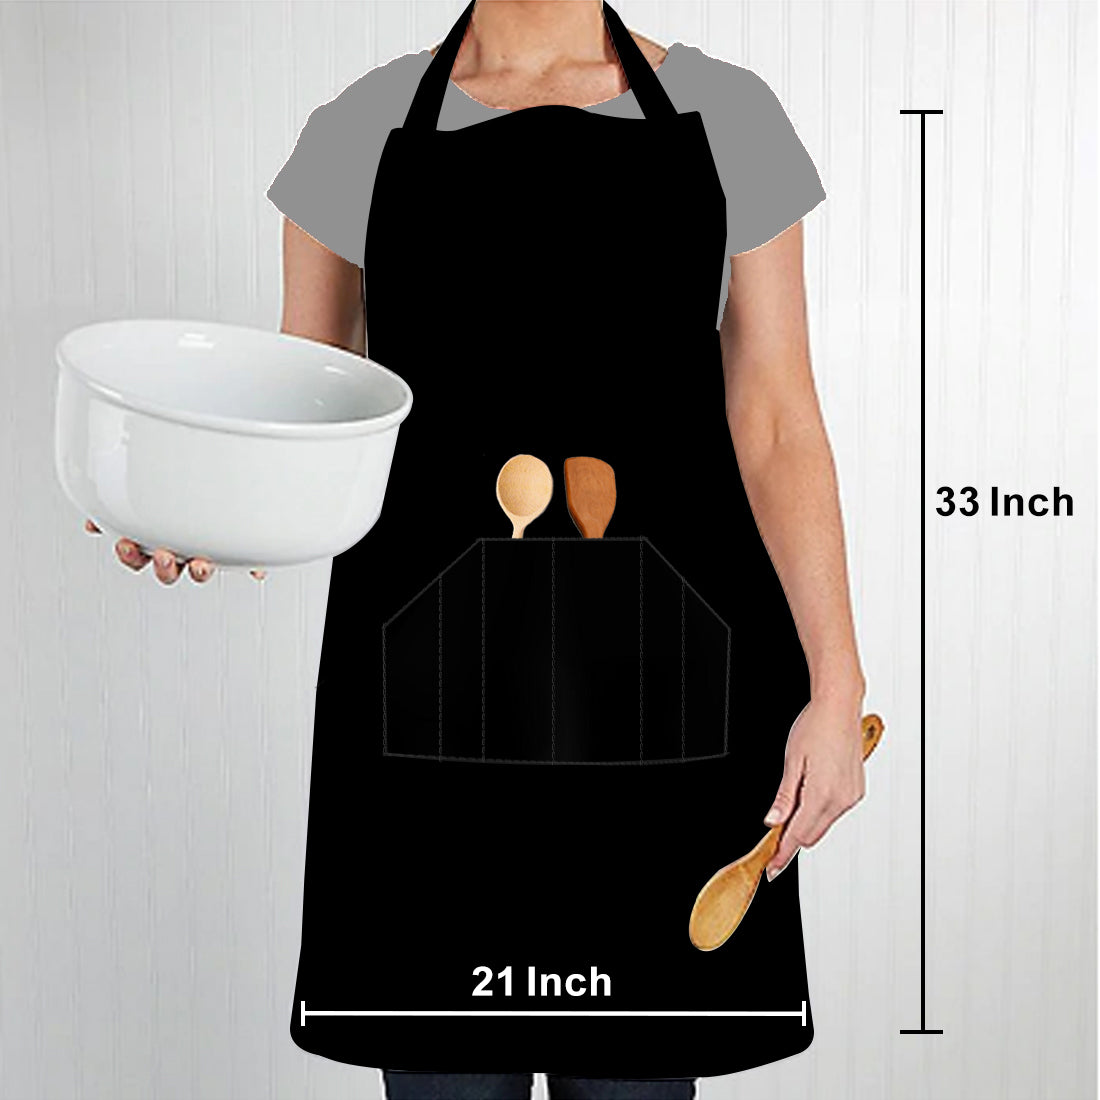 Apron for Kitchen for Men Baking Cooking - Grill Master Nutcase